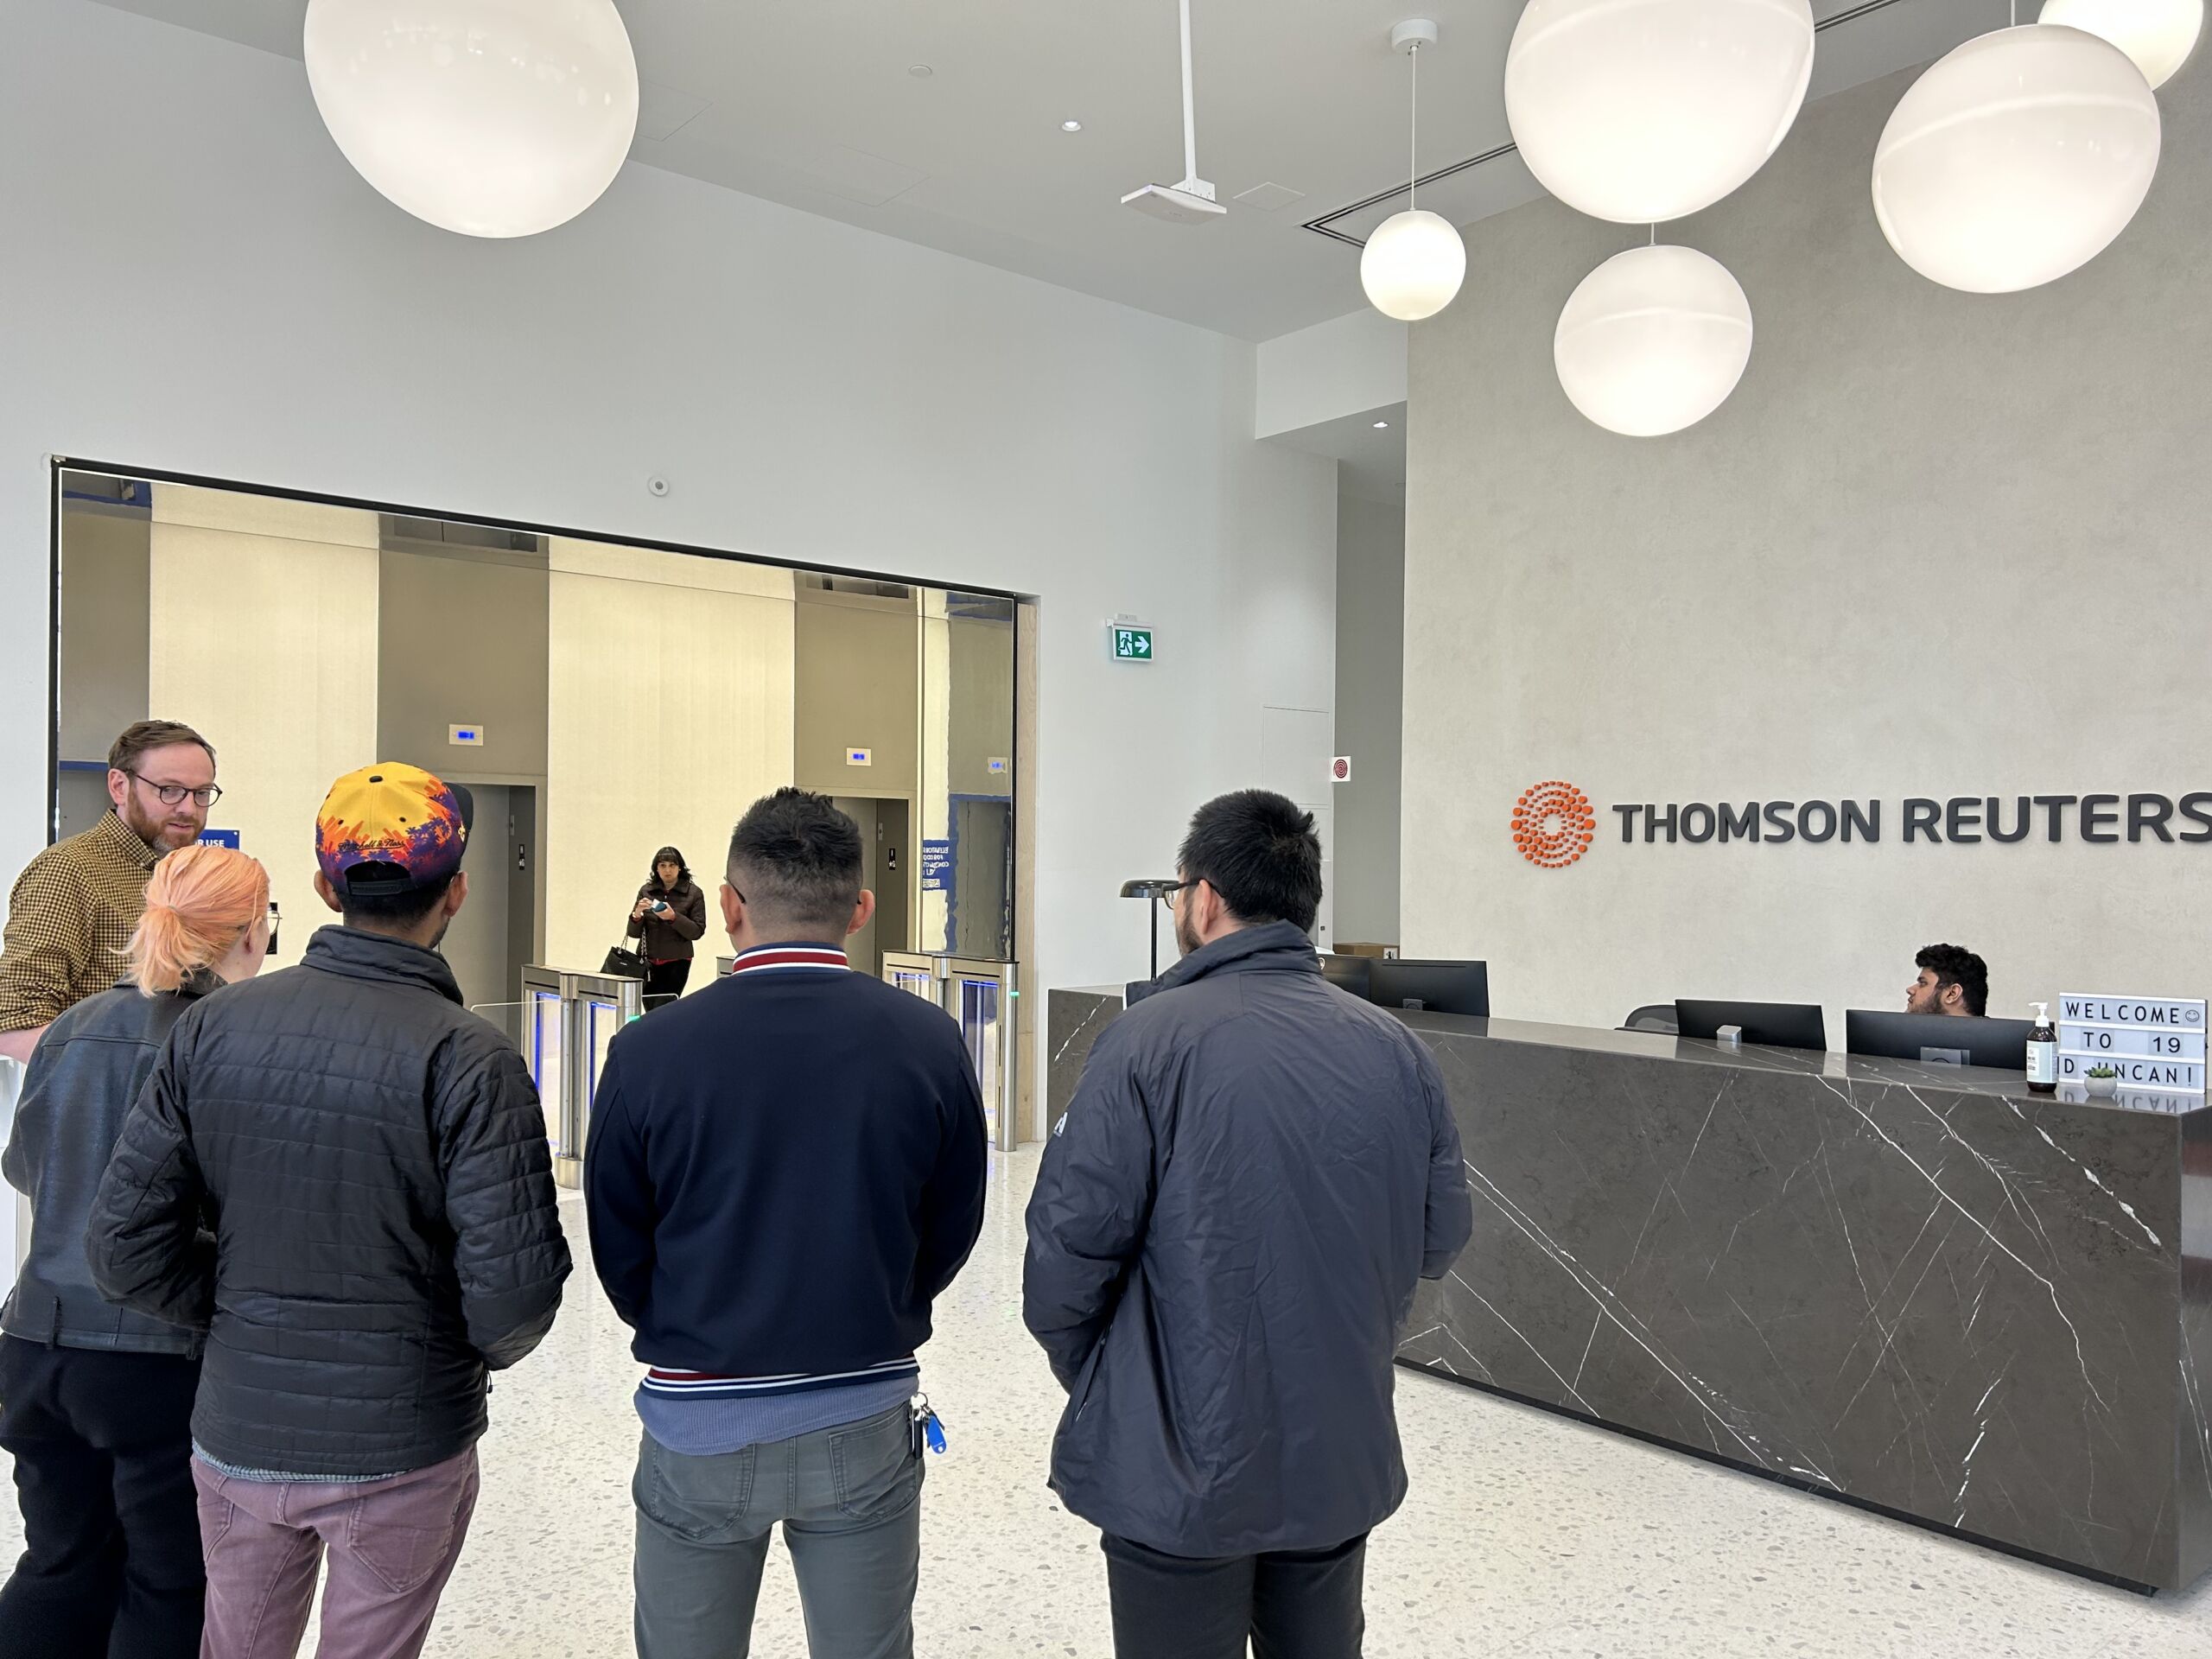 Teammates in Toronto standing in the lobby while touring the new center, examining the accessibility features, and learning about Thomson Reuters' inclusive workplace design guidelines.